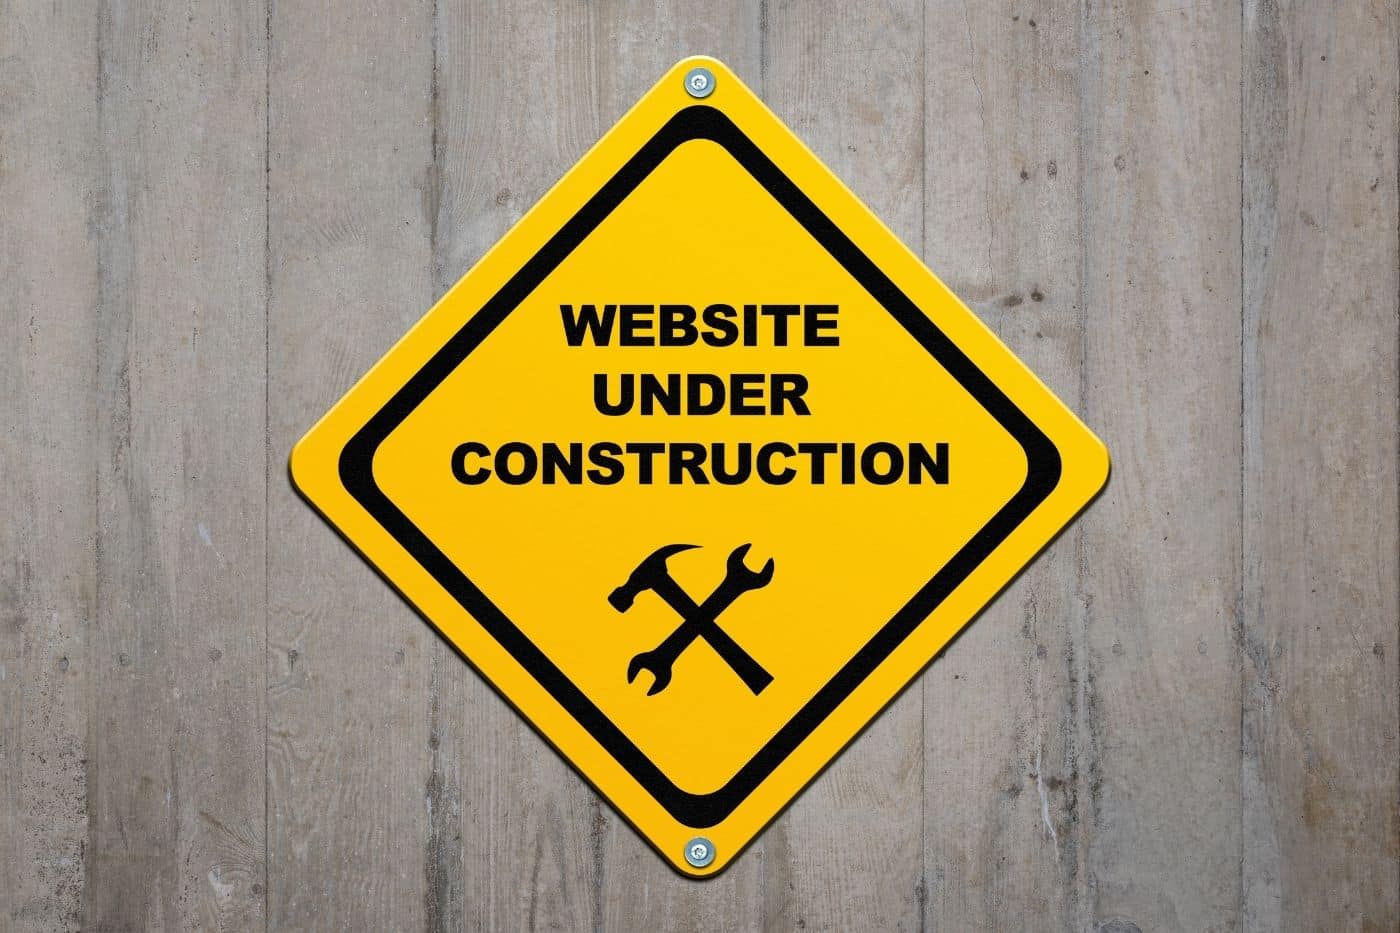 Peer Sales Agency optimizes lead generating websites for the construction industry in Omaha, NE.